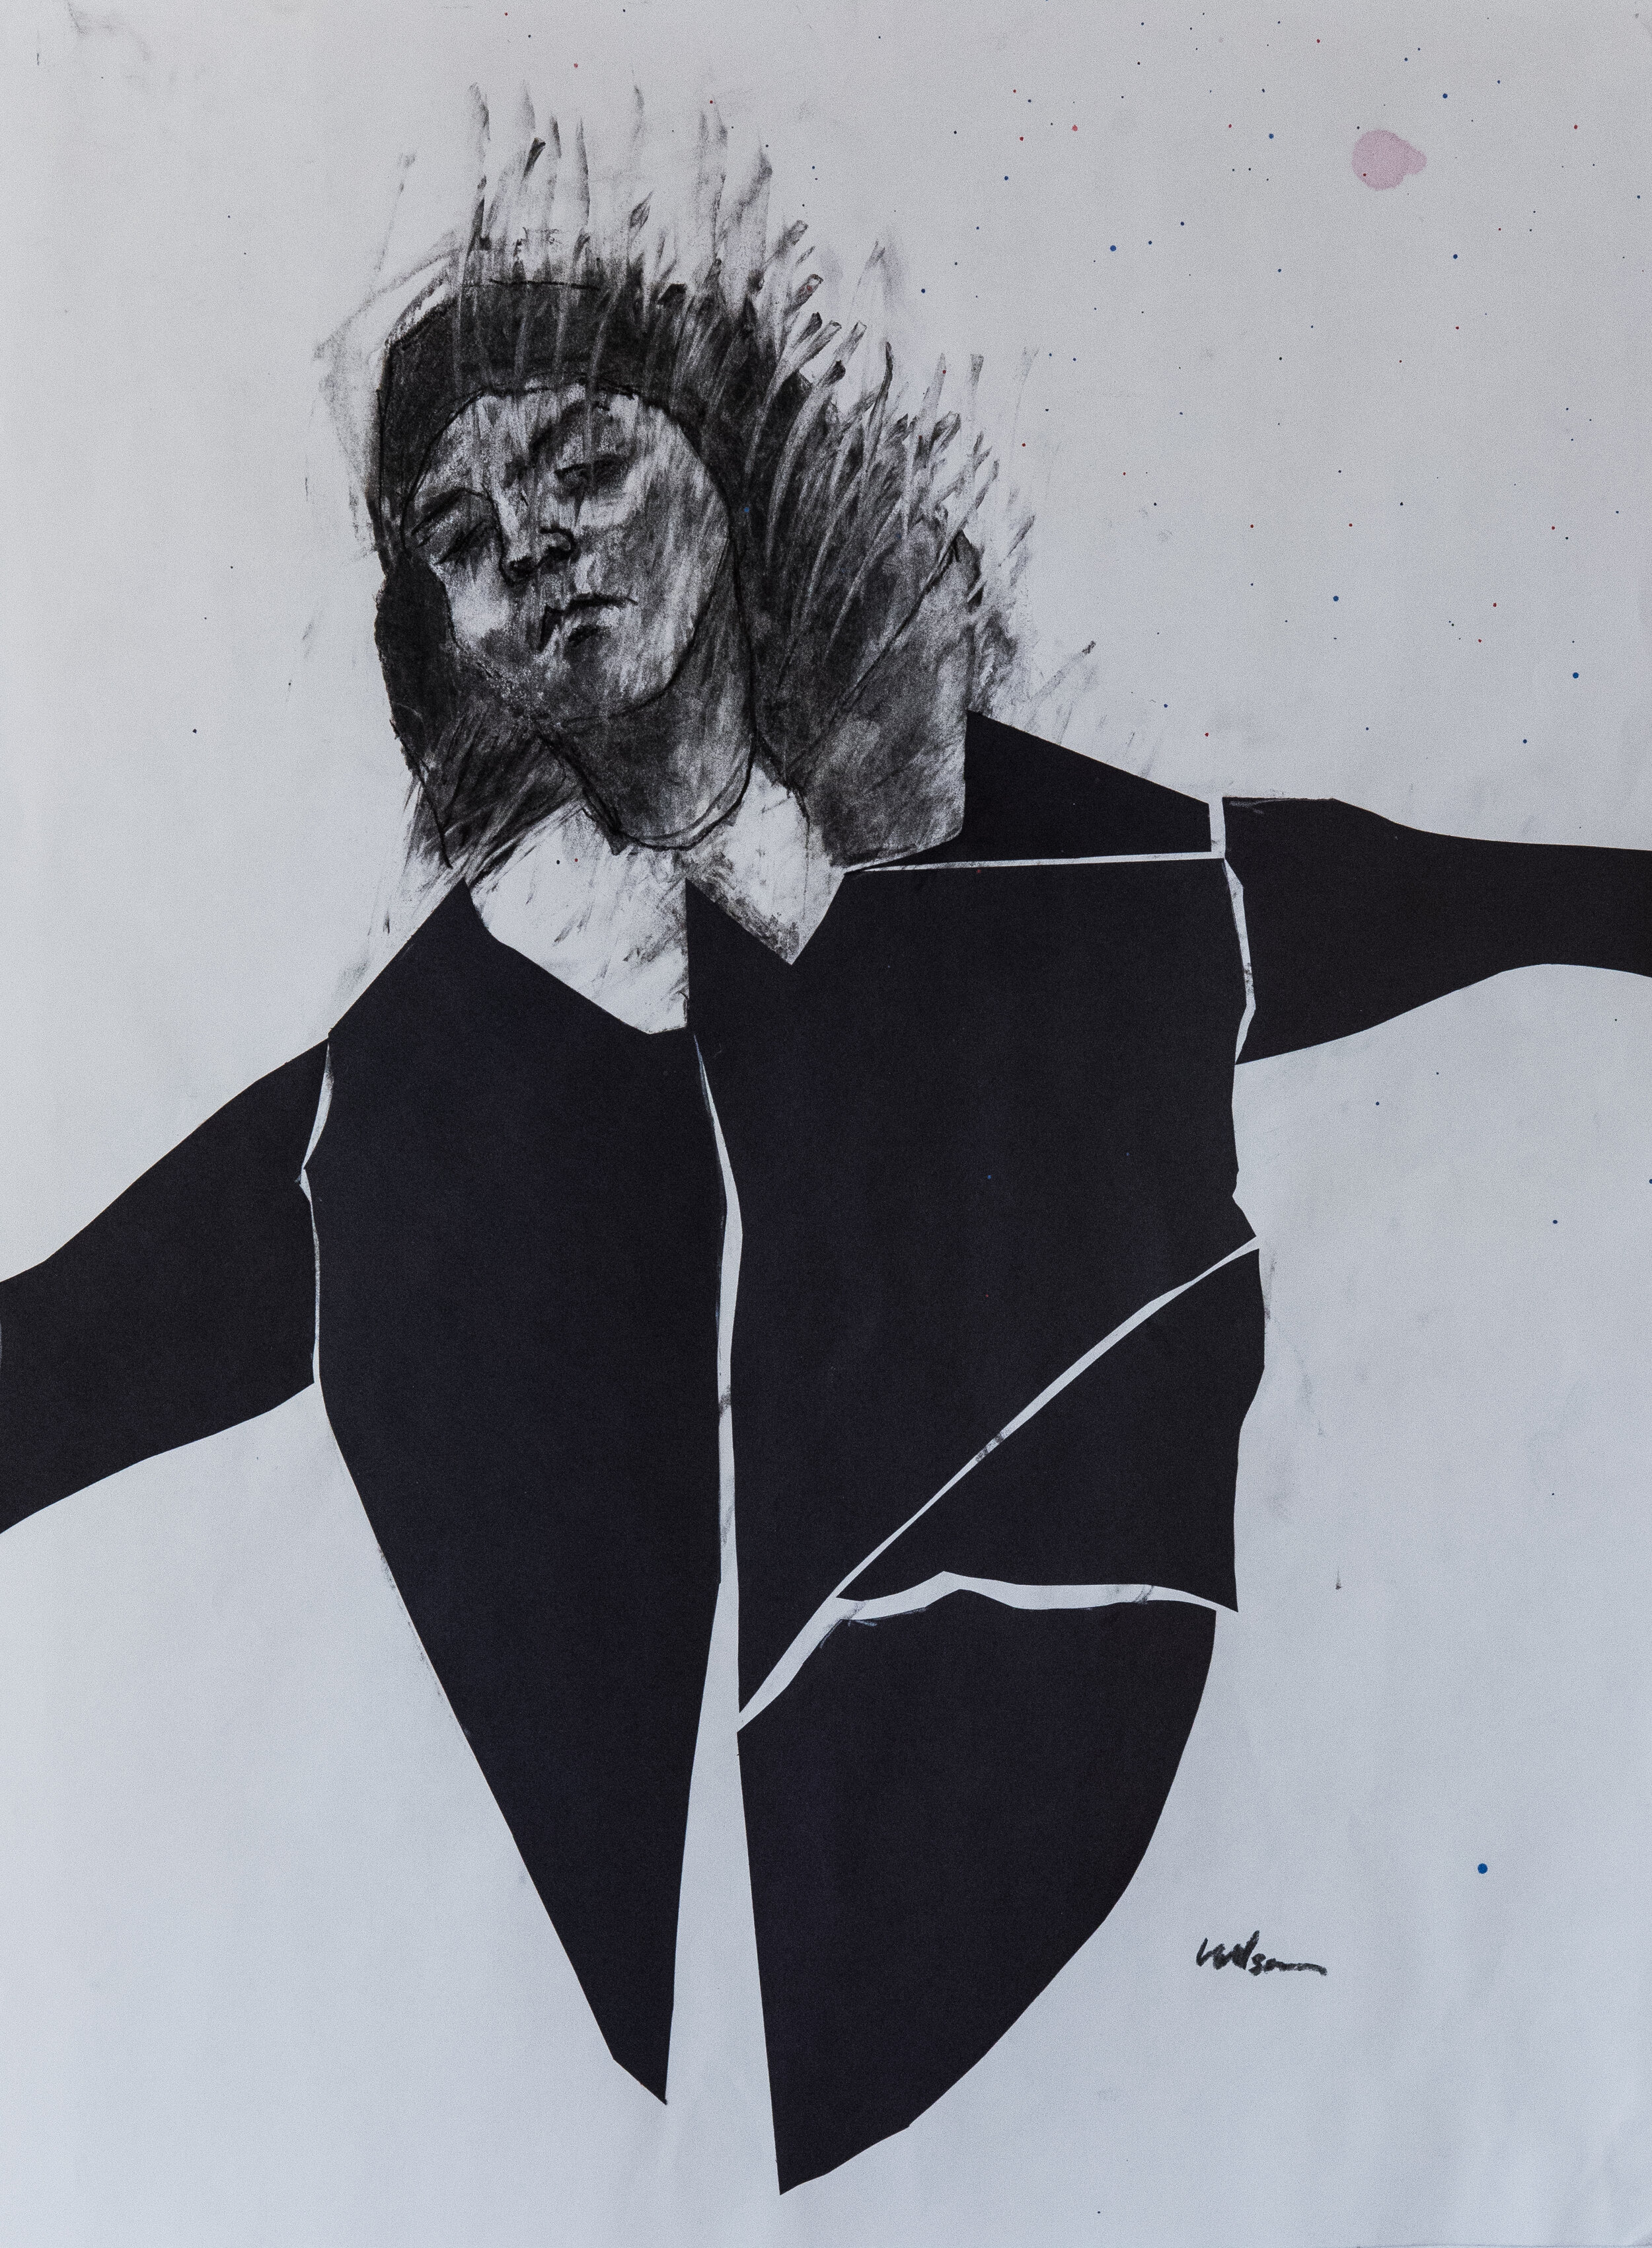 Carlson_Sister_charcoal on paper_18 x 24 inches_2019_SOLD.jpg